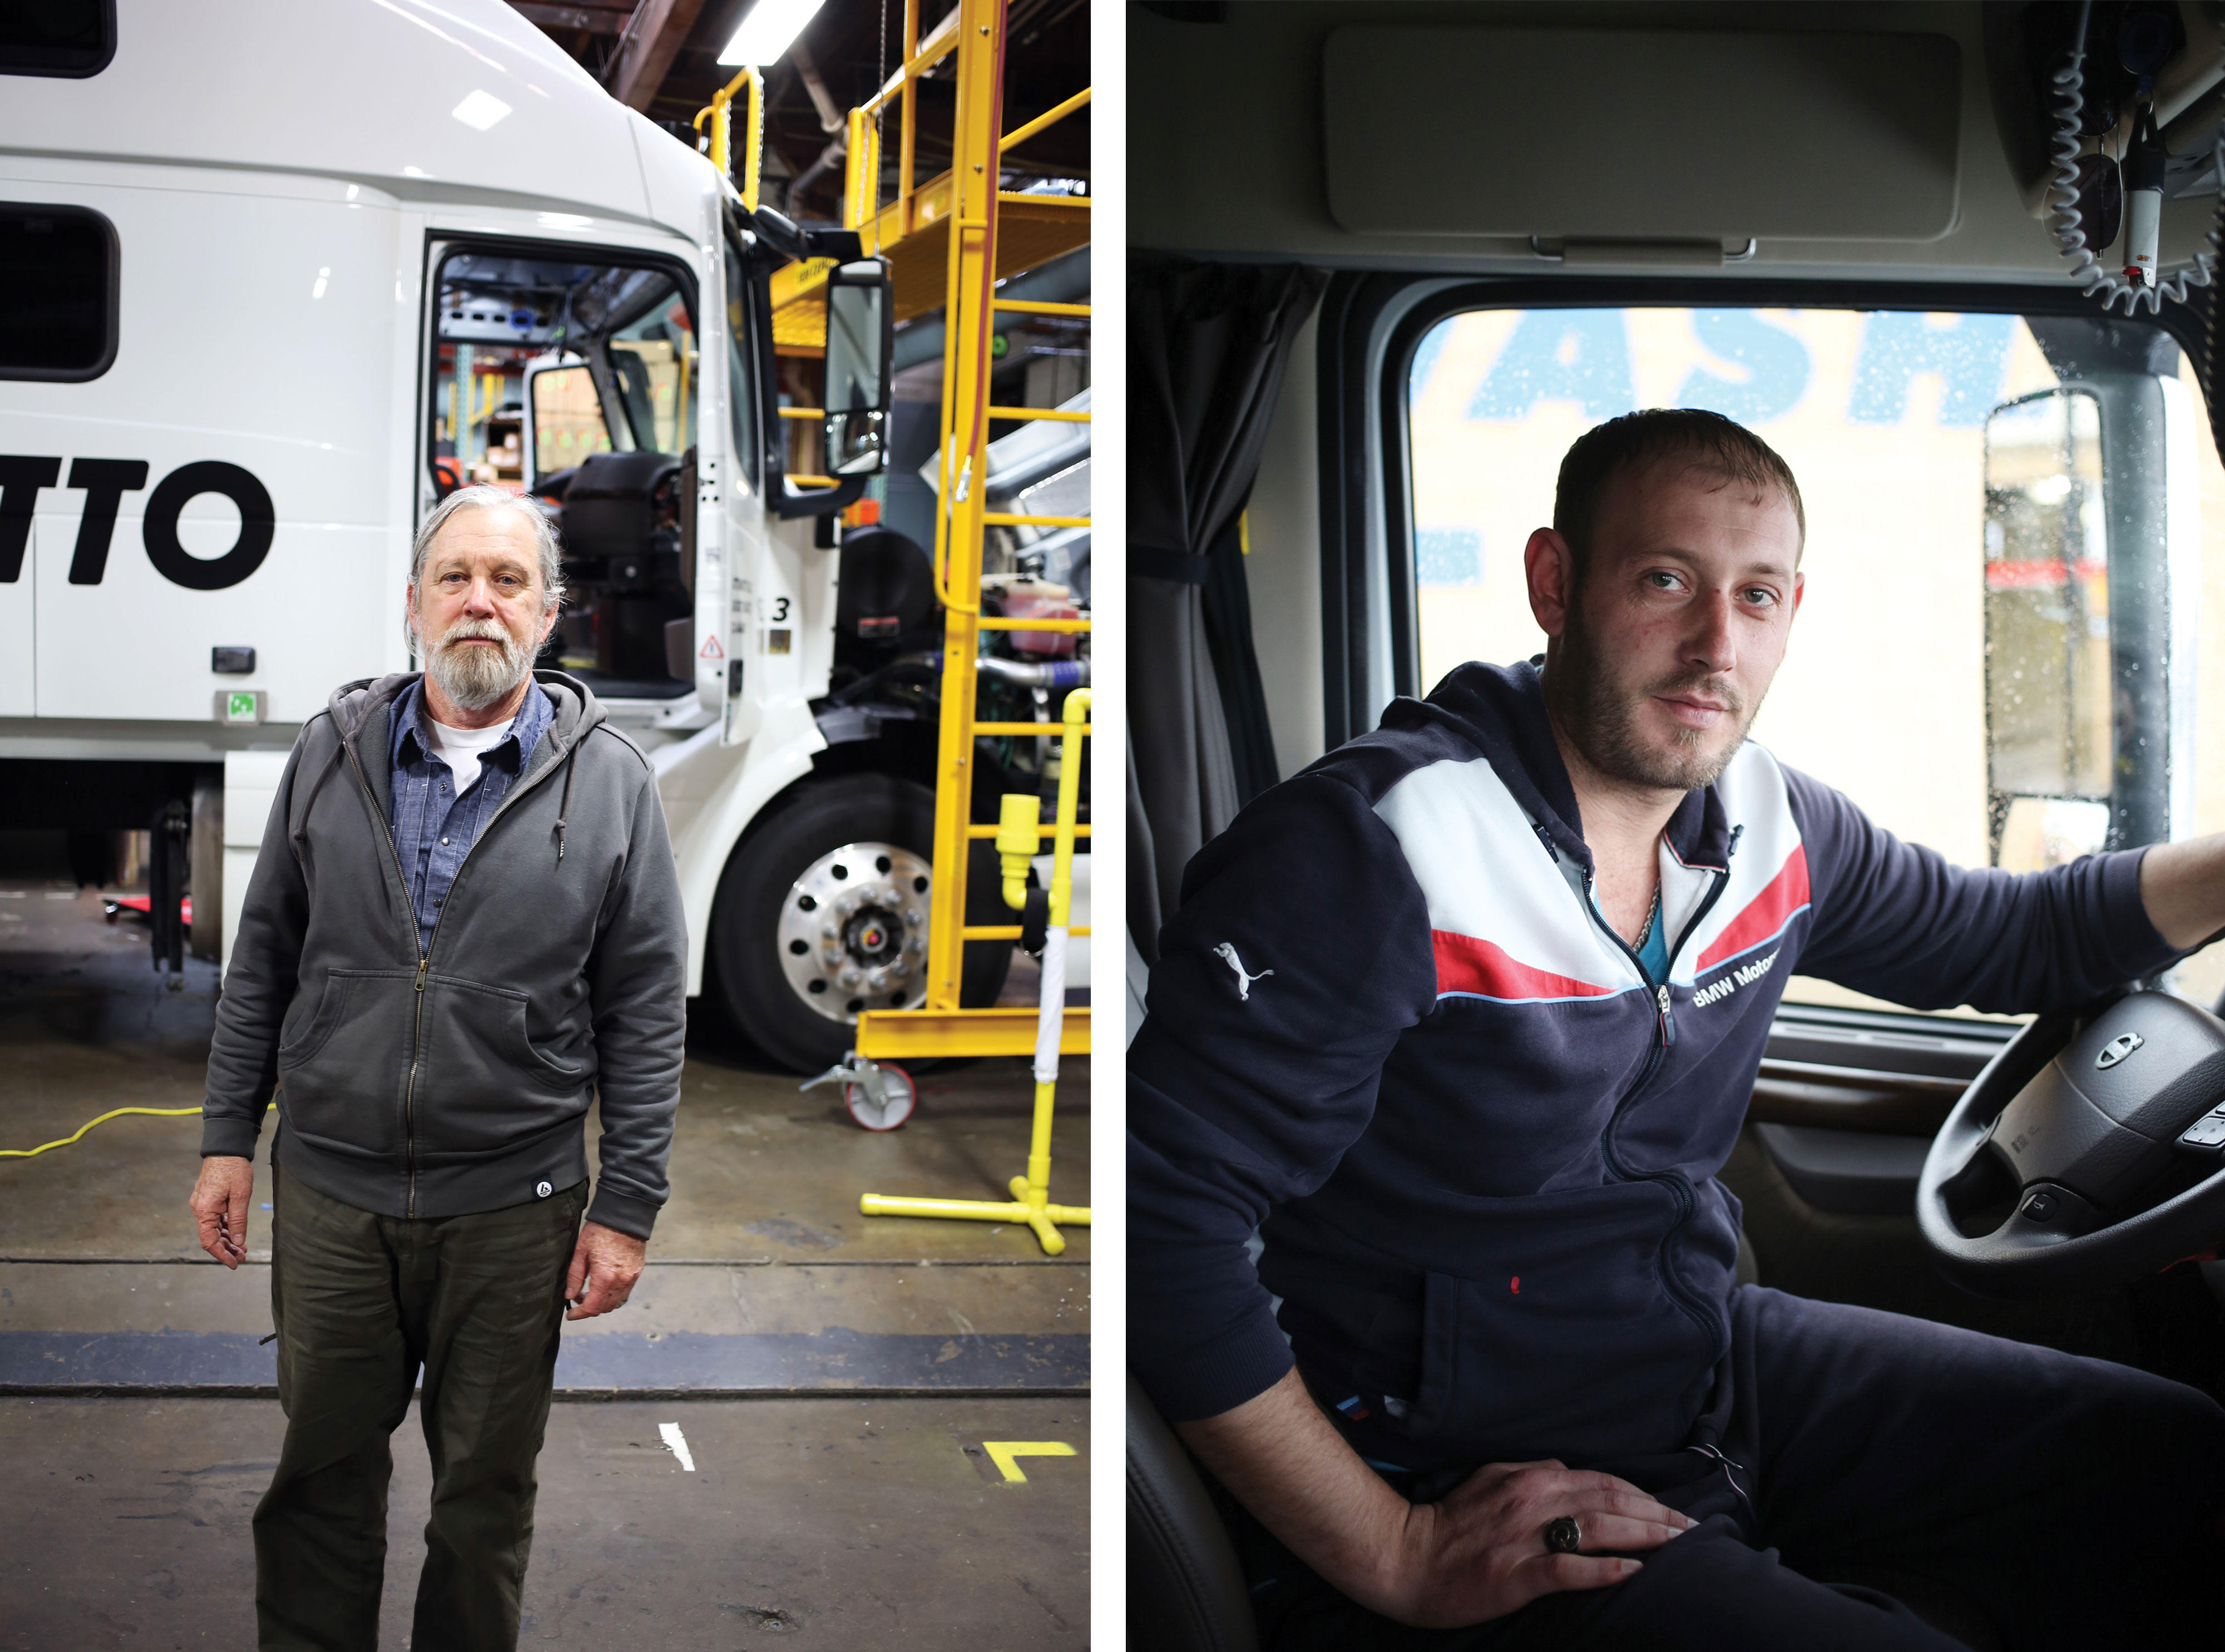 Greg Murphy, left,a longtime long-haul trucker, keeps an eye on things during tests of Otto trucks.<br><br>Roman Mugriyev, right, wonders how well self-driving trucks would handle dangerous situations.